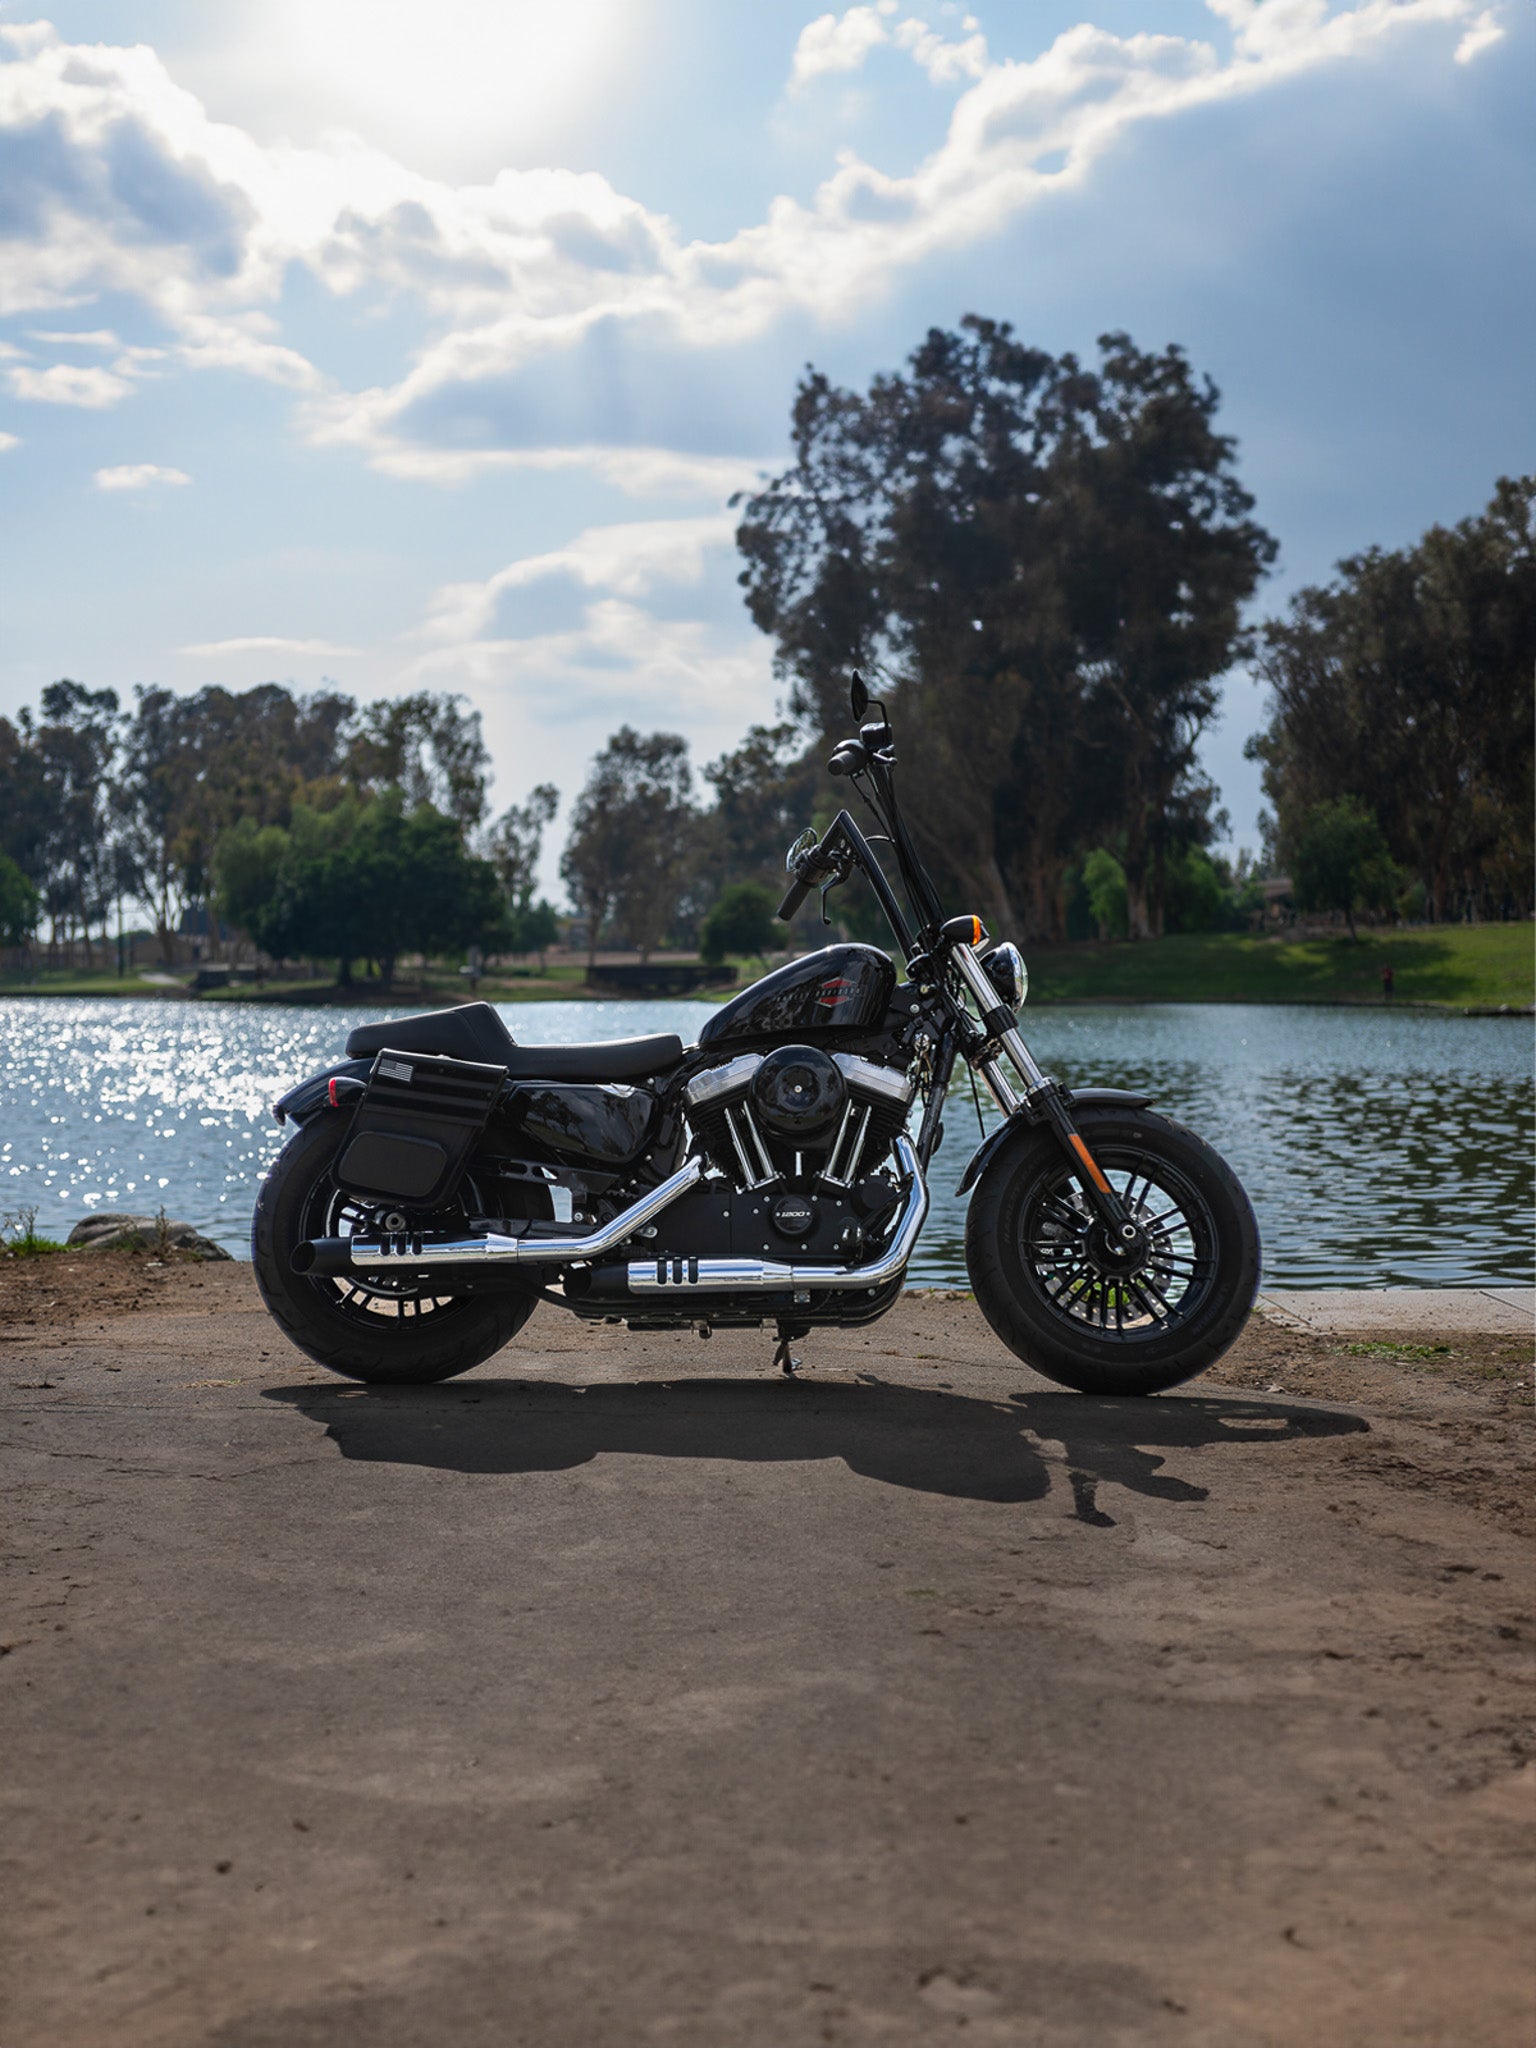 All Motorcycle Bags, Parts & Accessories for Harley Sportster 1200 Nightster Mobile Banner